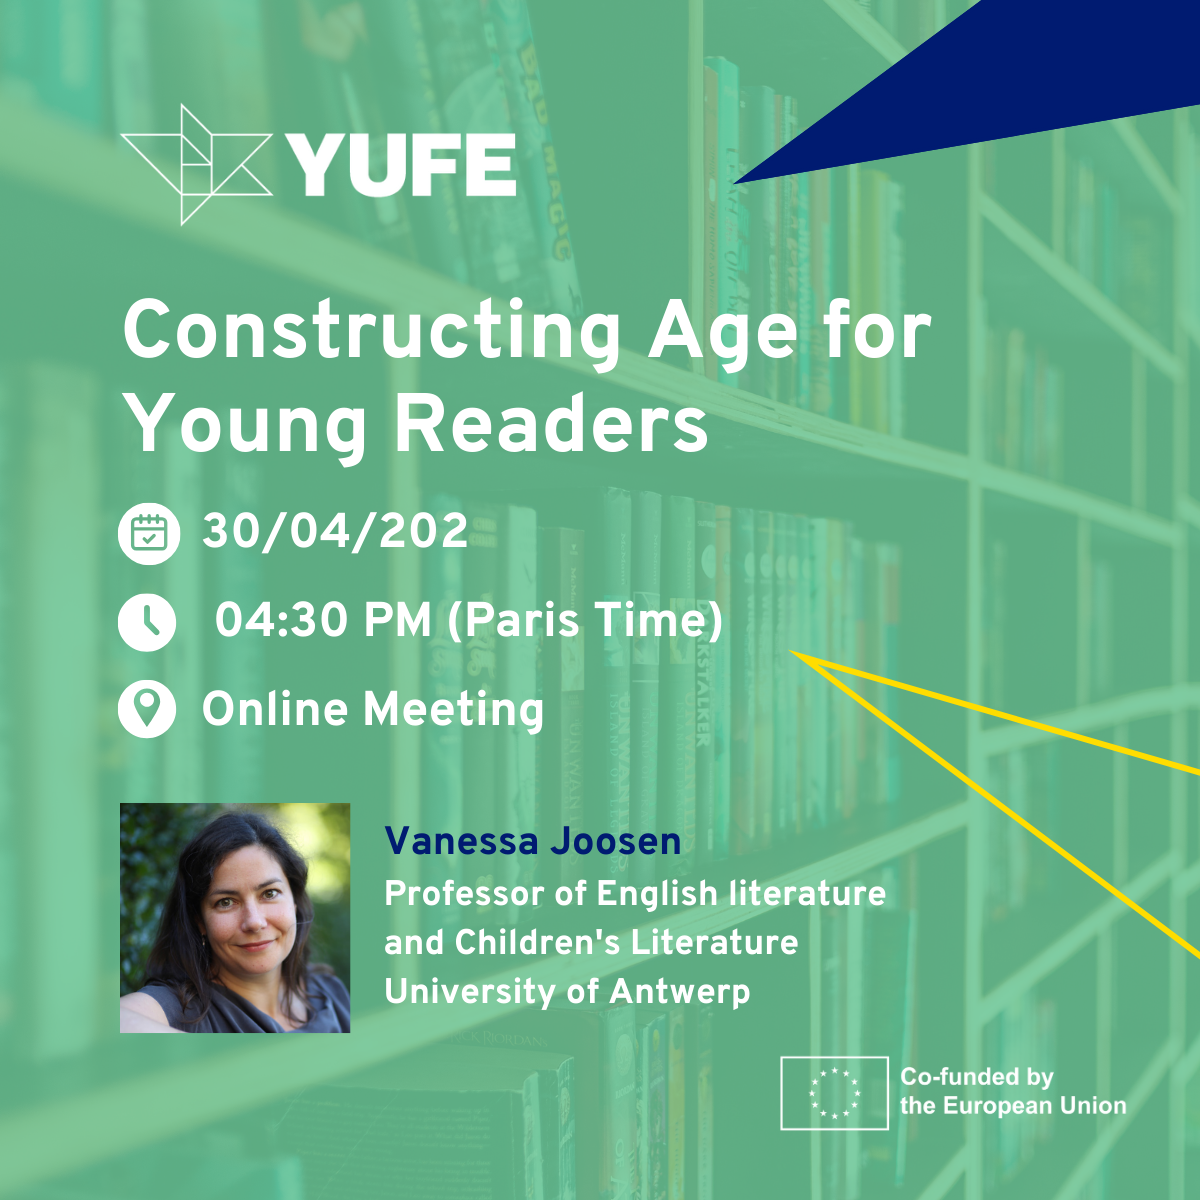 Constructing Age for Young Readers